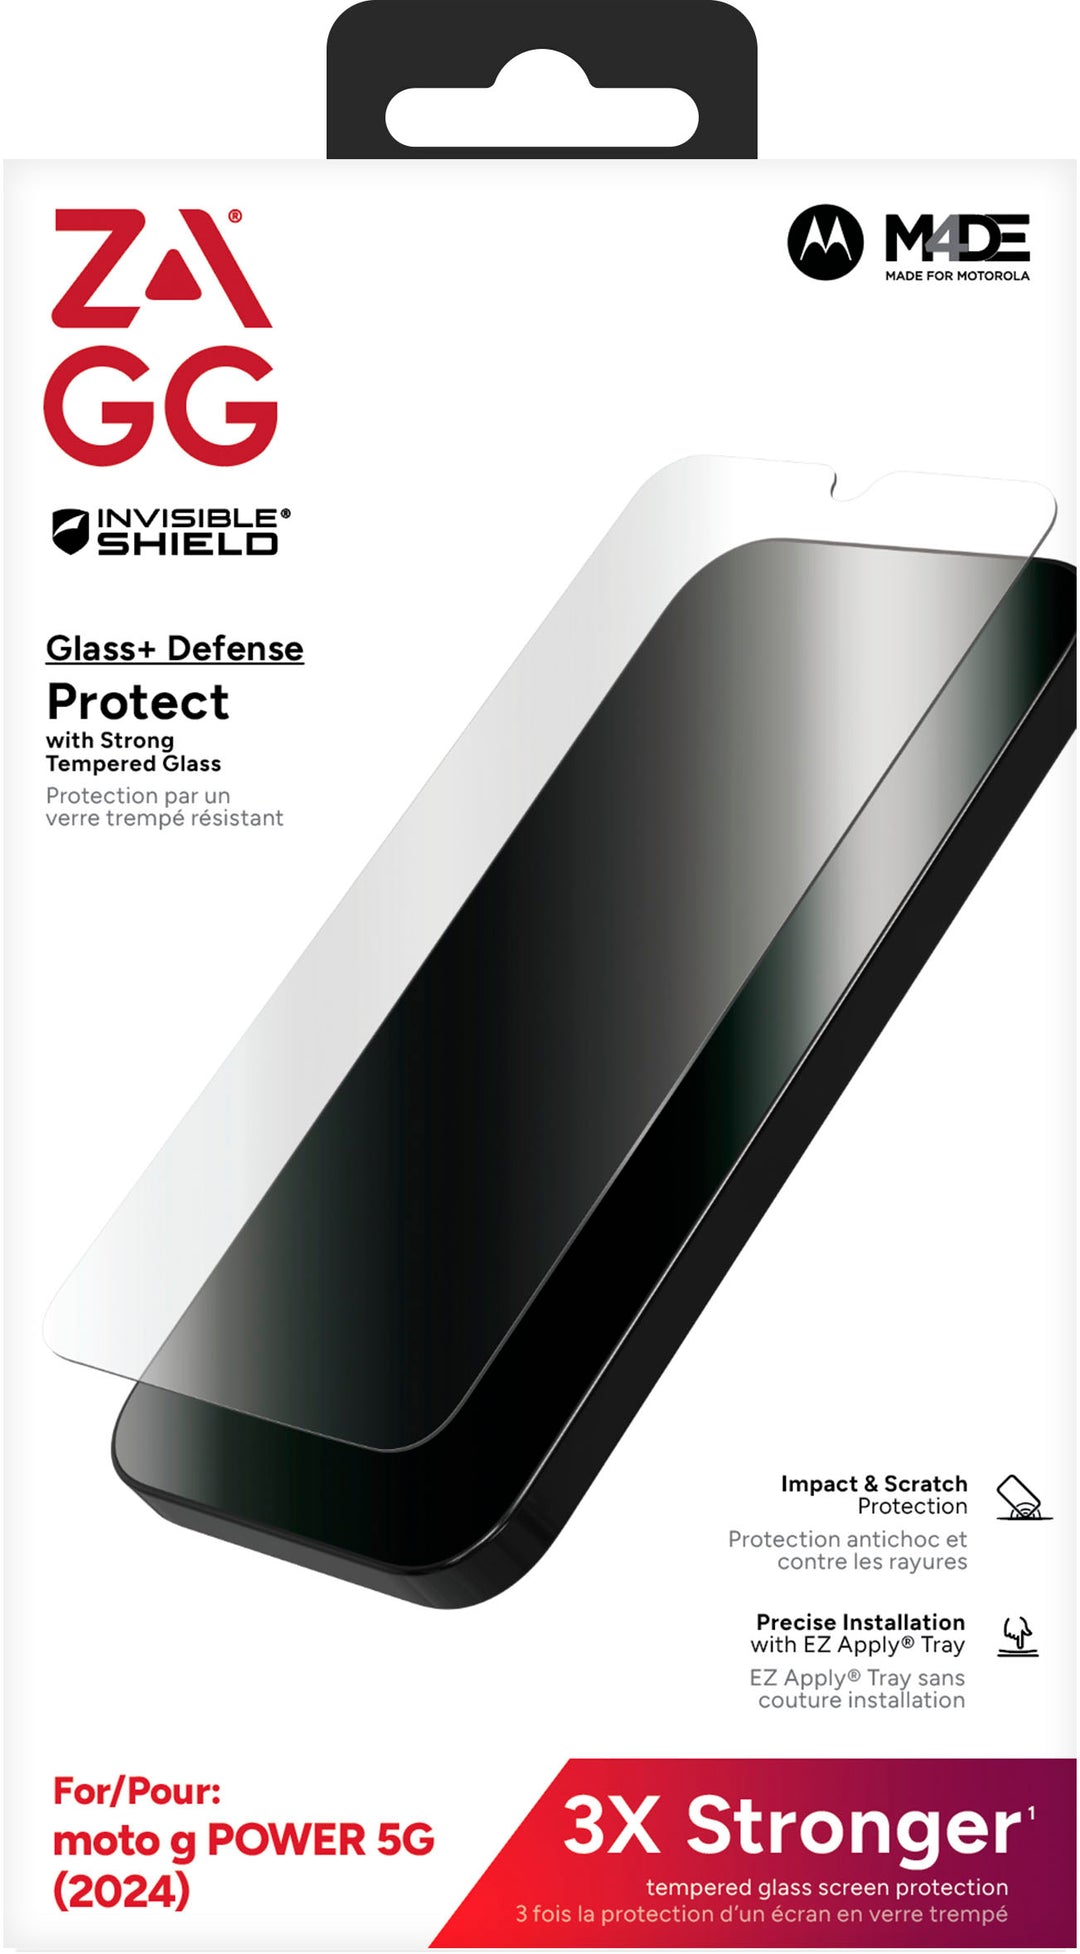 ZAGG - InvisibleShield Glass+ Defense Screen Protector for Motorola G Power 5G (2024) - Clear_3